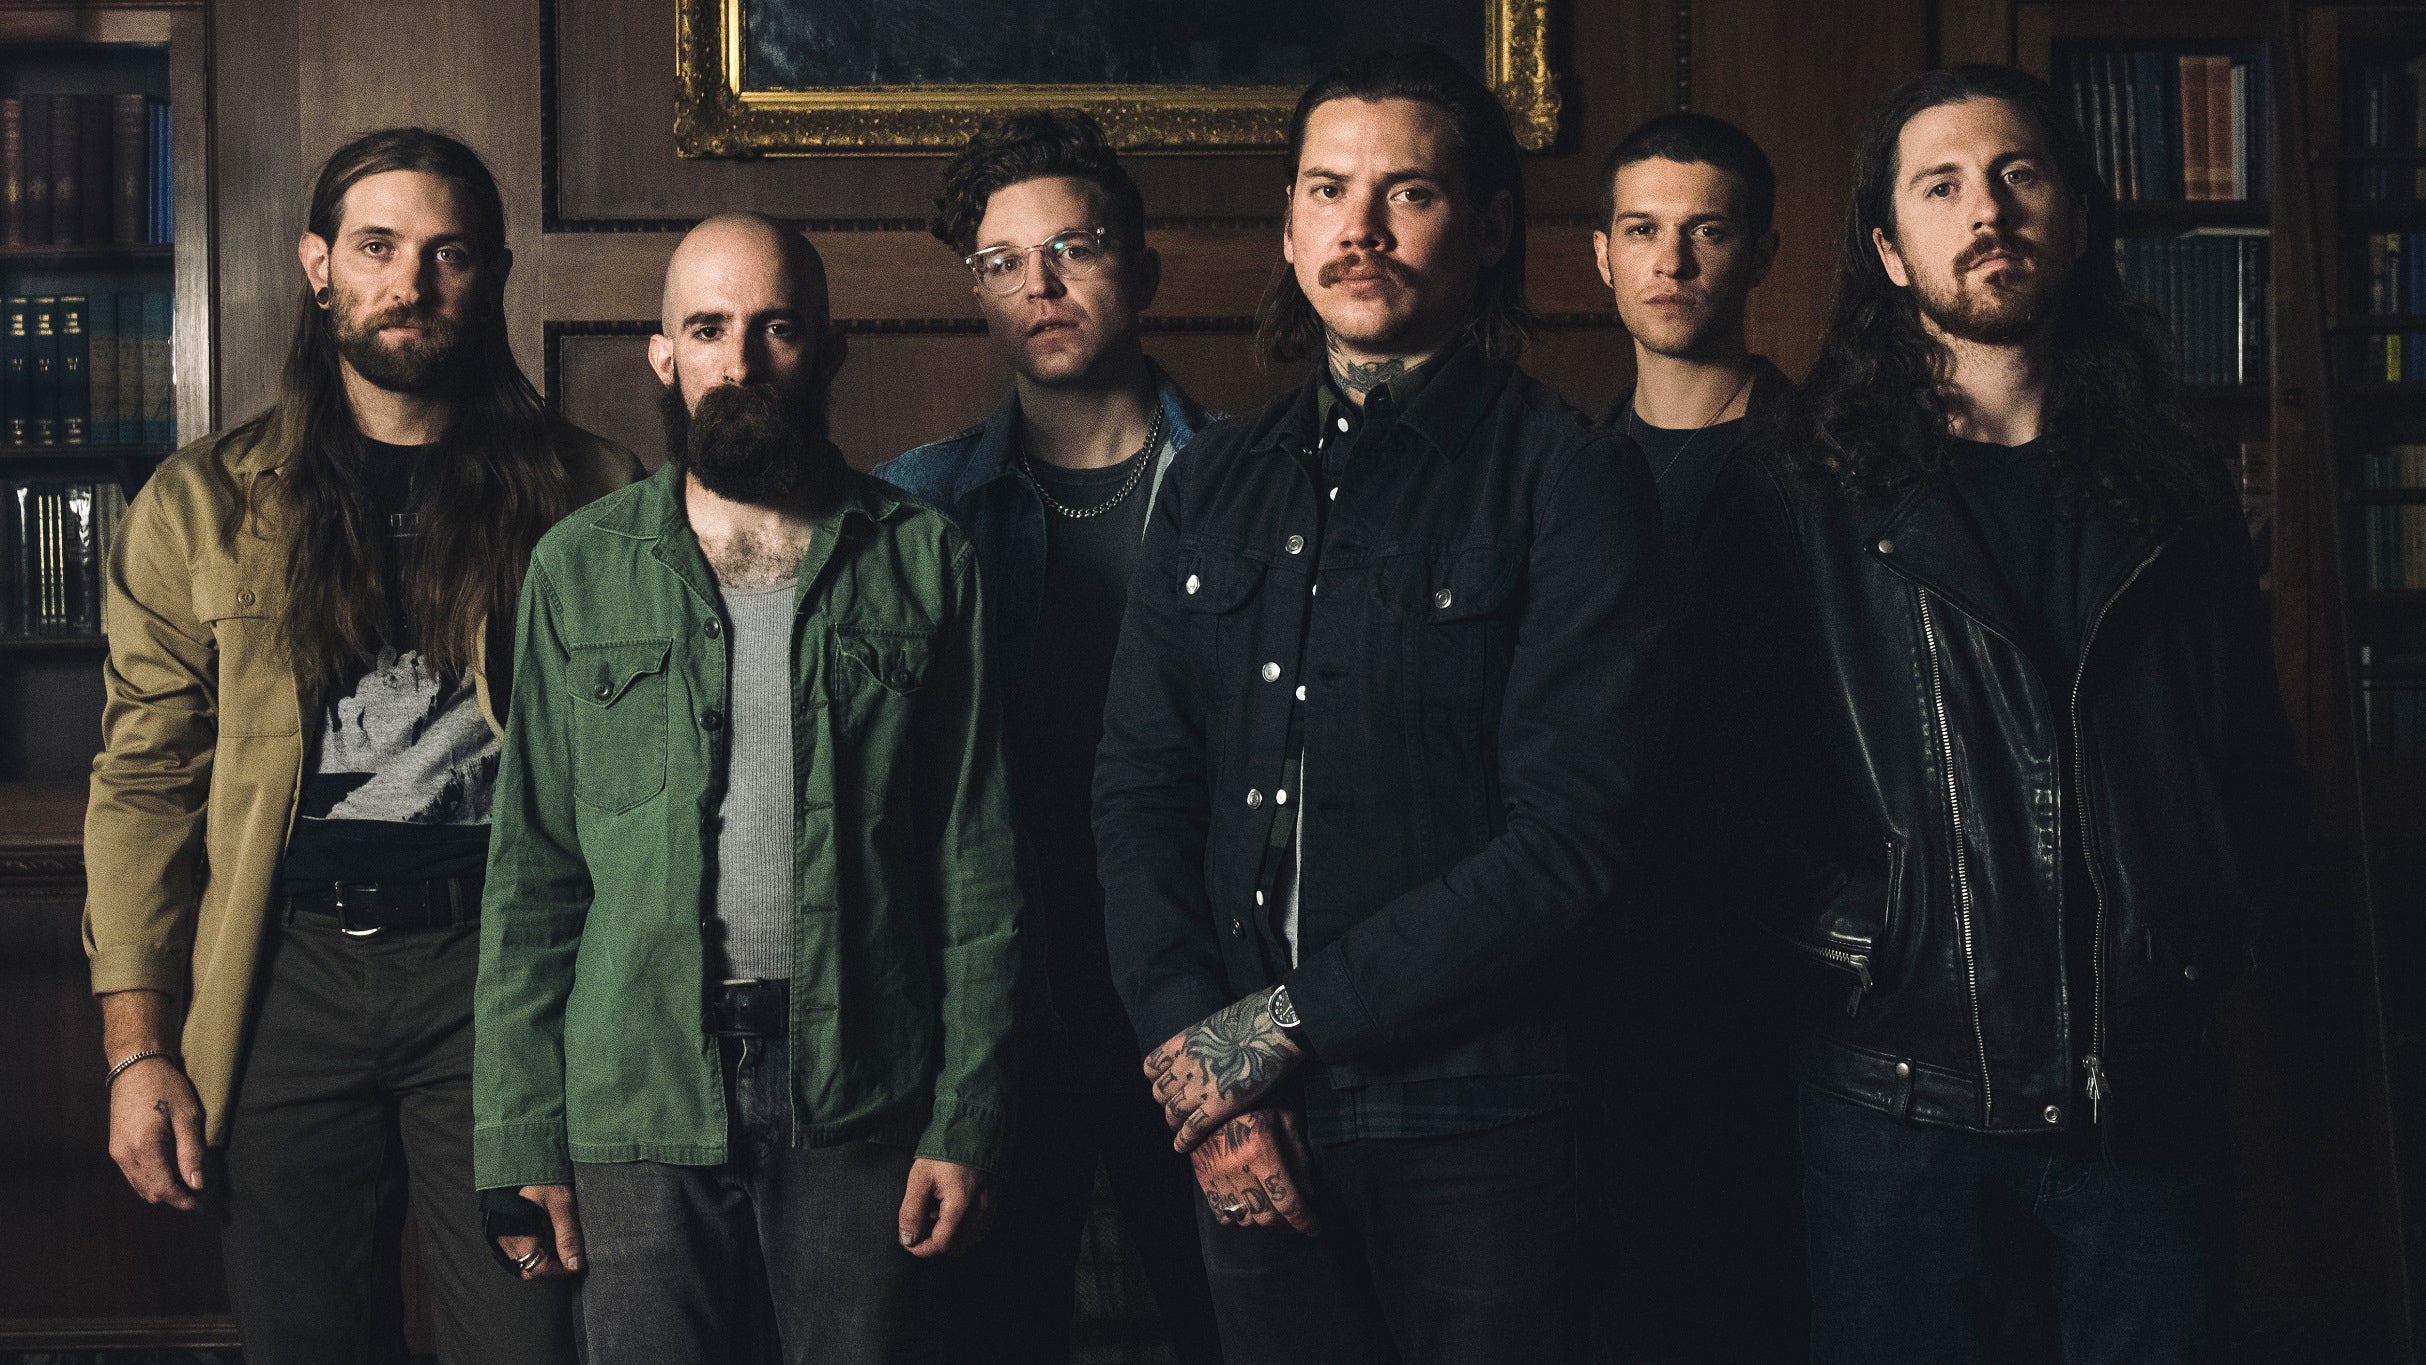 The Devil Wears Prada & Fit For A King: METALCORE DROPOUTS in Cincinnati promo photo for Blabbermouth / Knotfest presale offer code